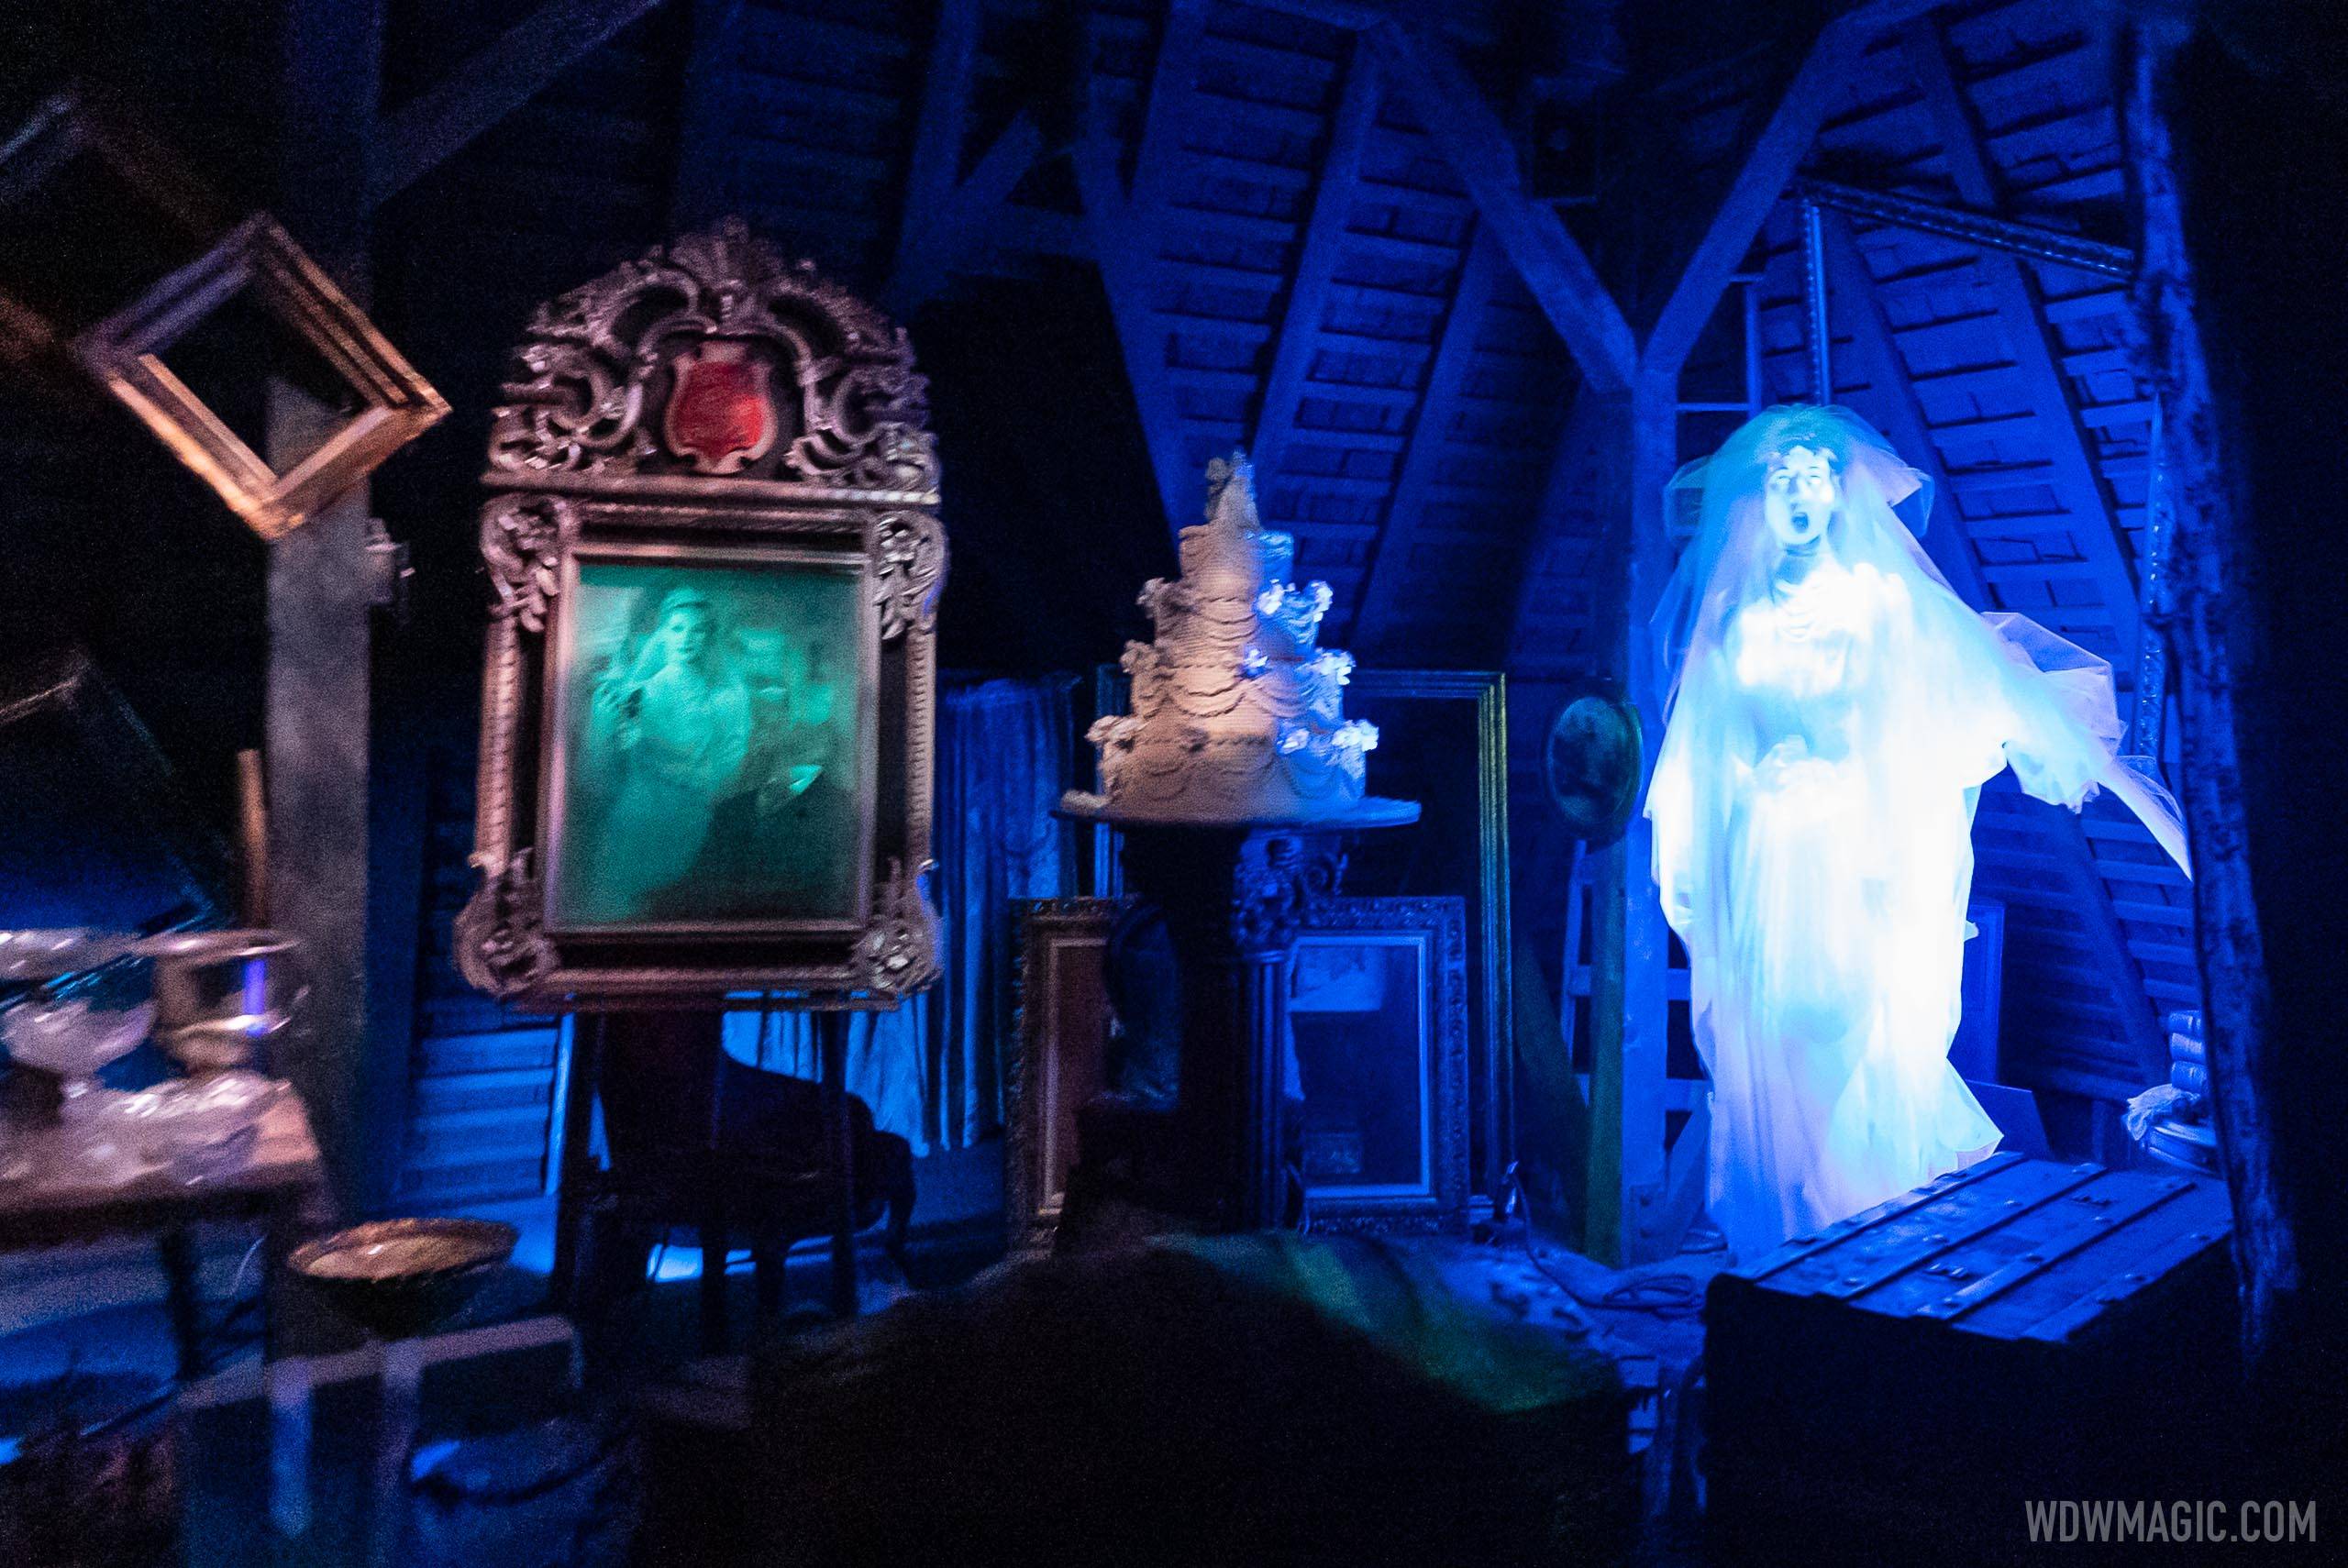 At the Haunted Mansion, the pre-show is still not available and is a walk-through